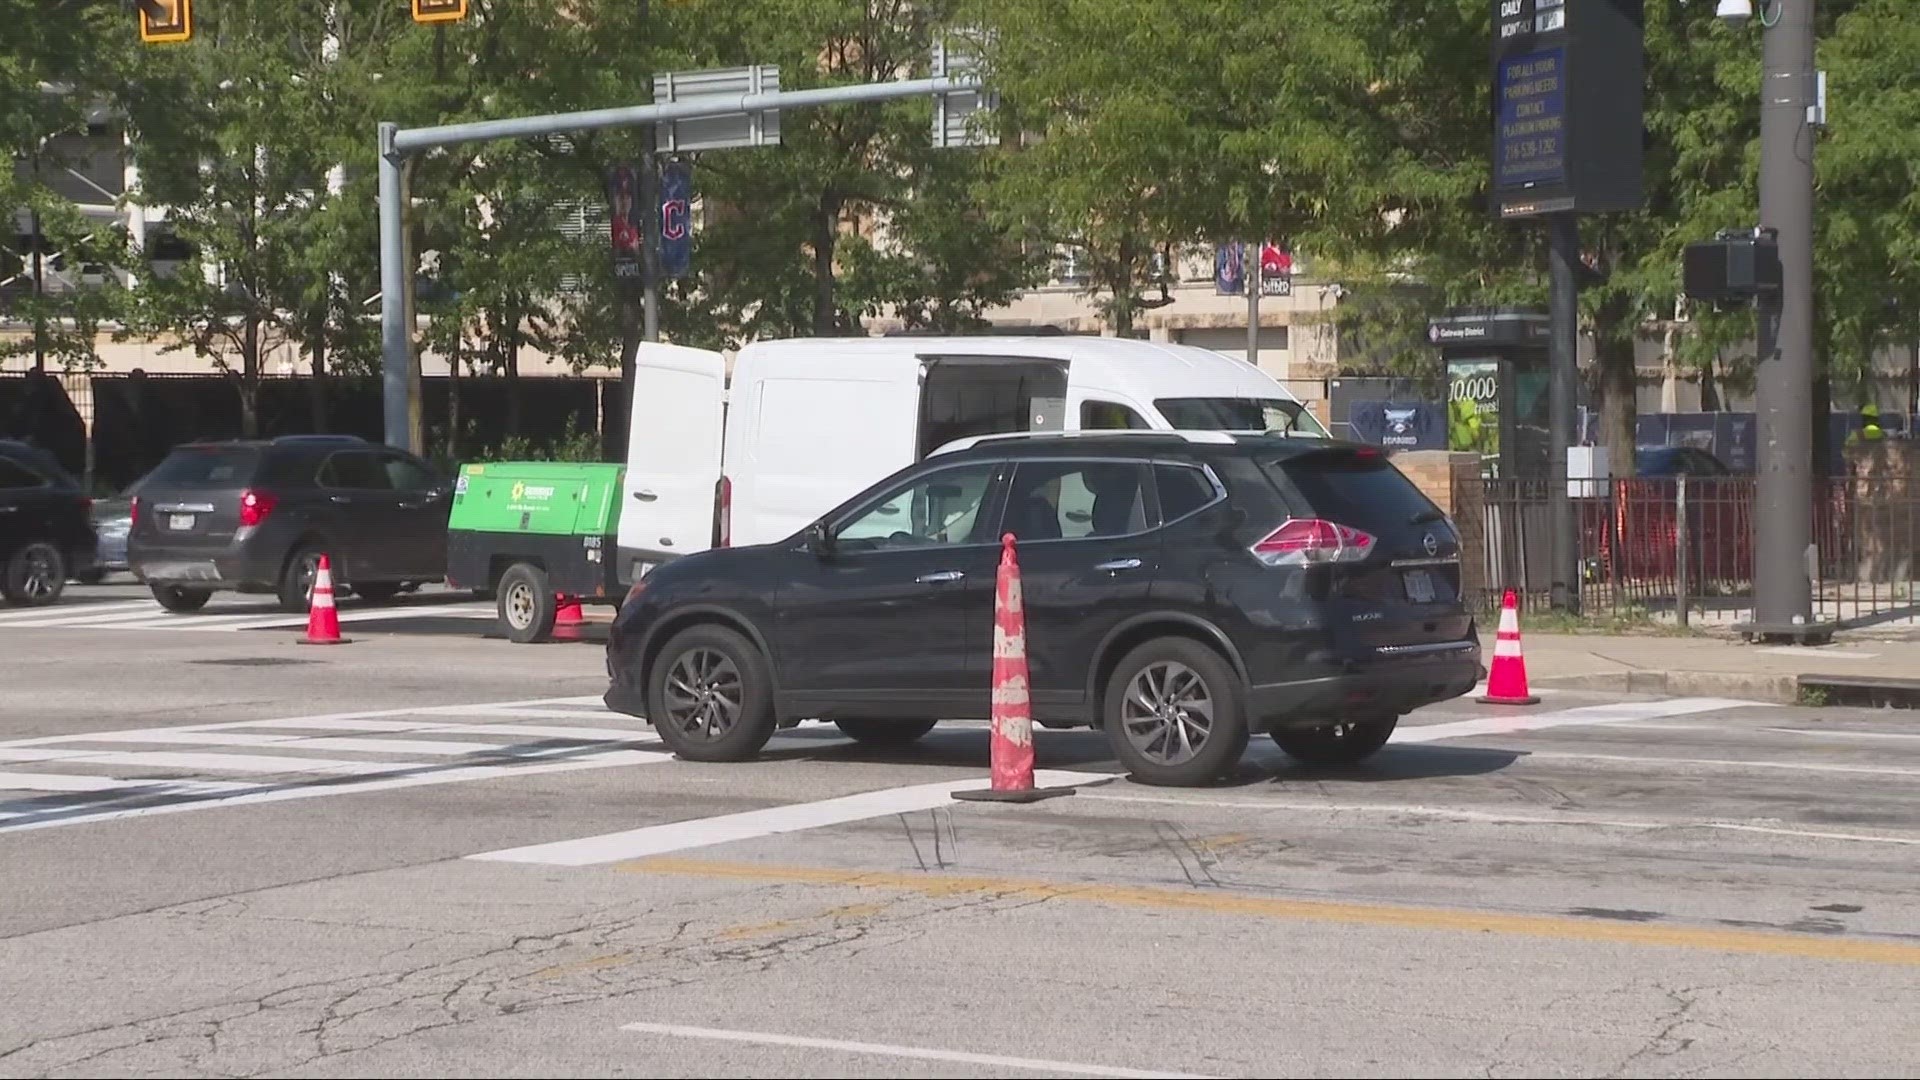 Officials from the city of Cleveland say they have surveillance cameras at the intersection of East 9th Street and Carnegie Avenue to aid the investigation.